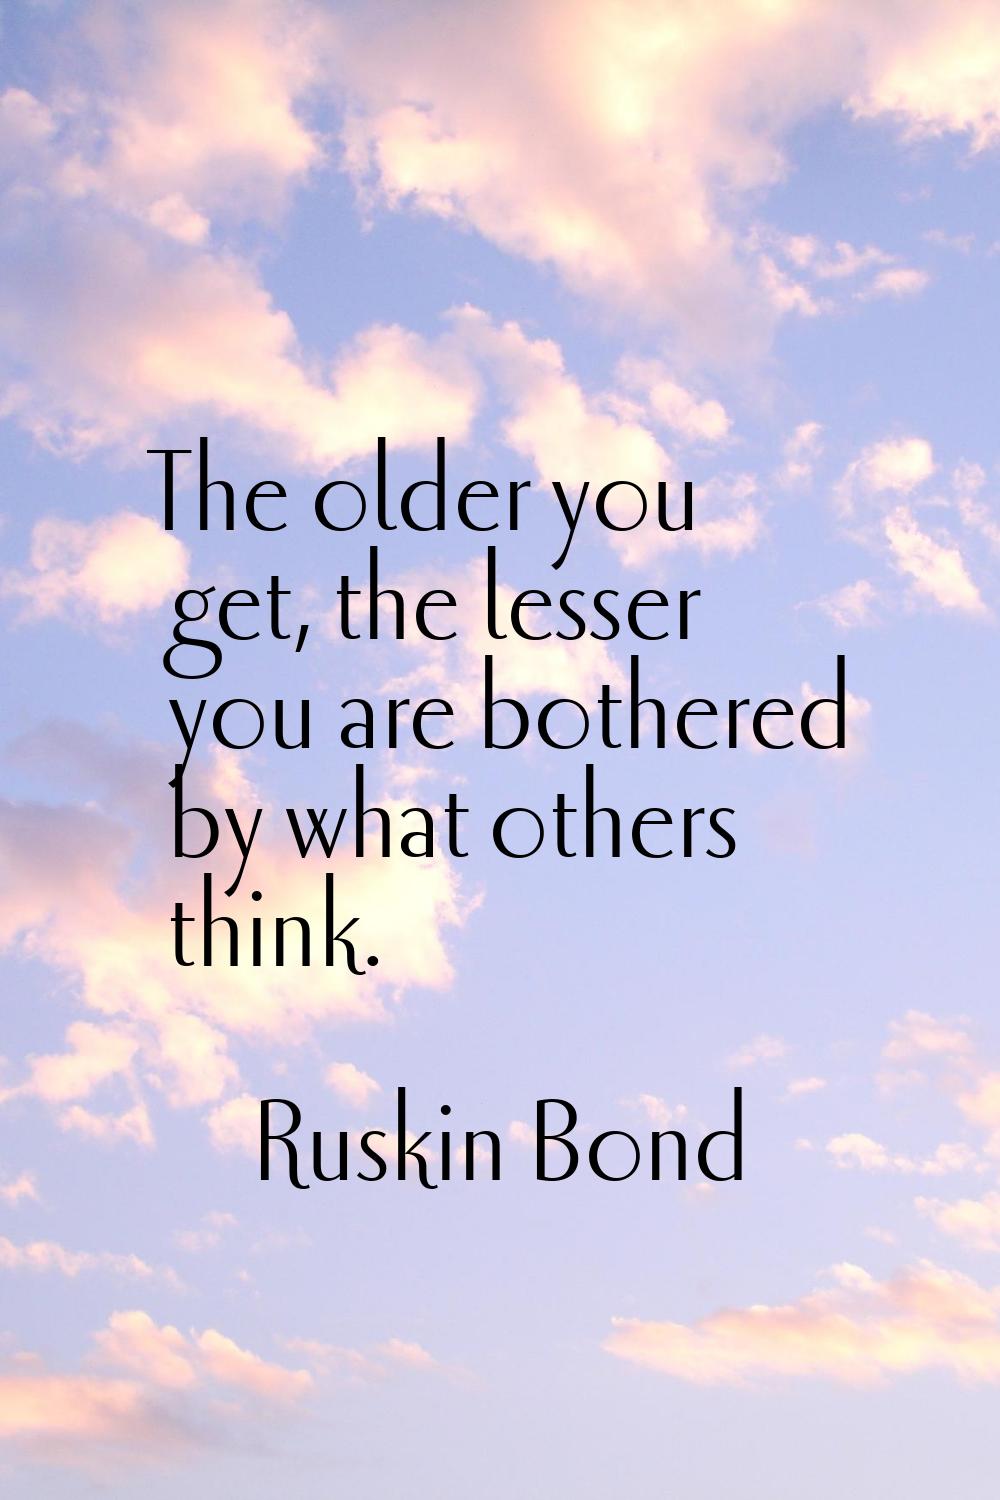 The older you get, the lesser you are bothered by what others think.